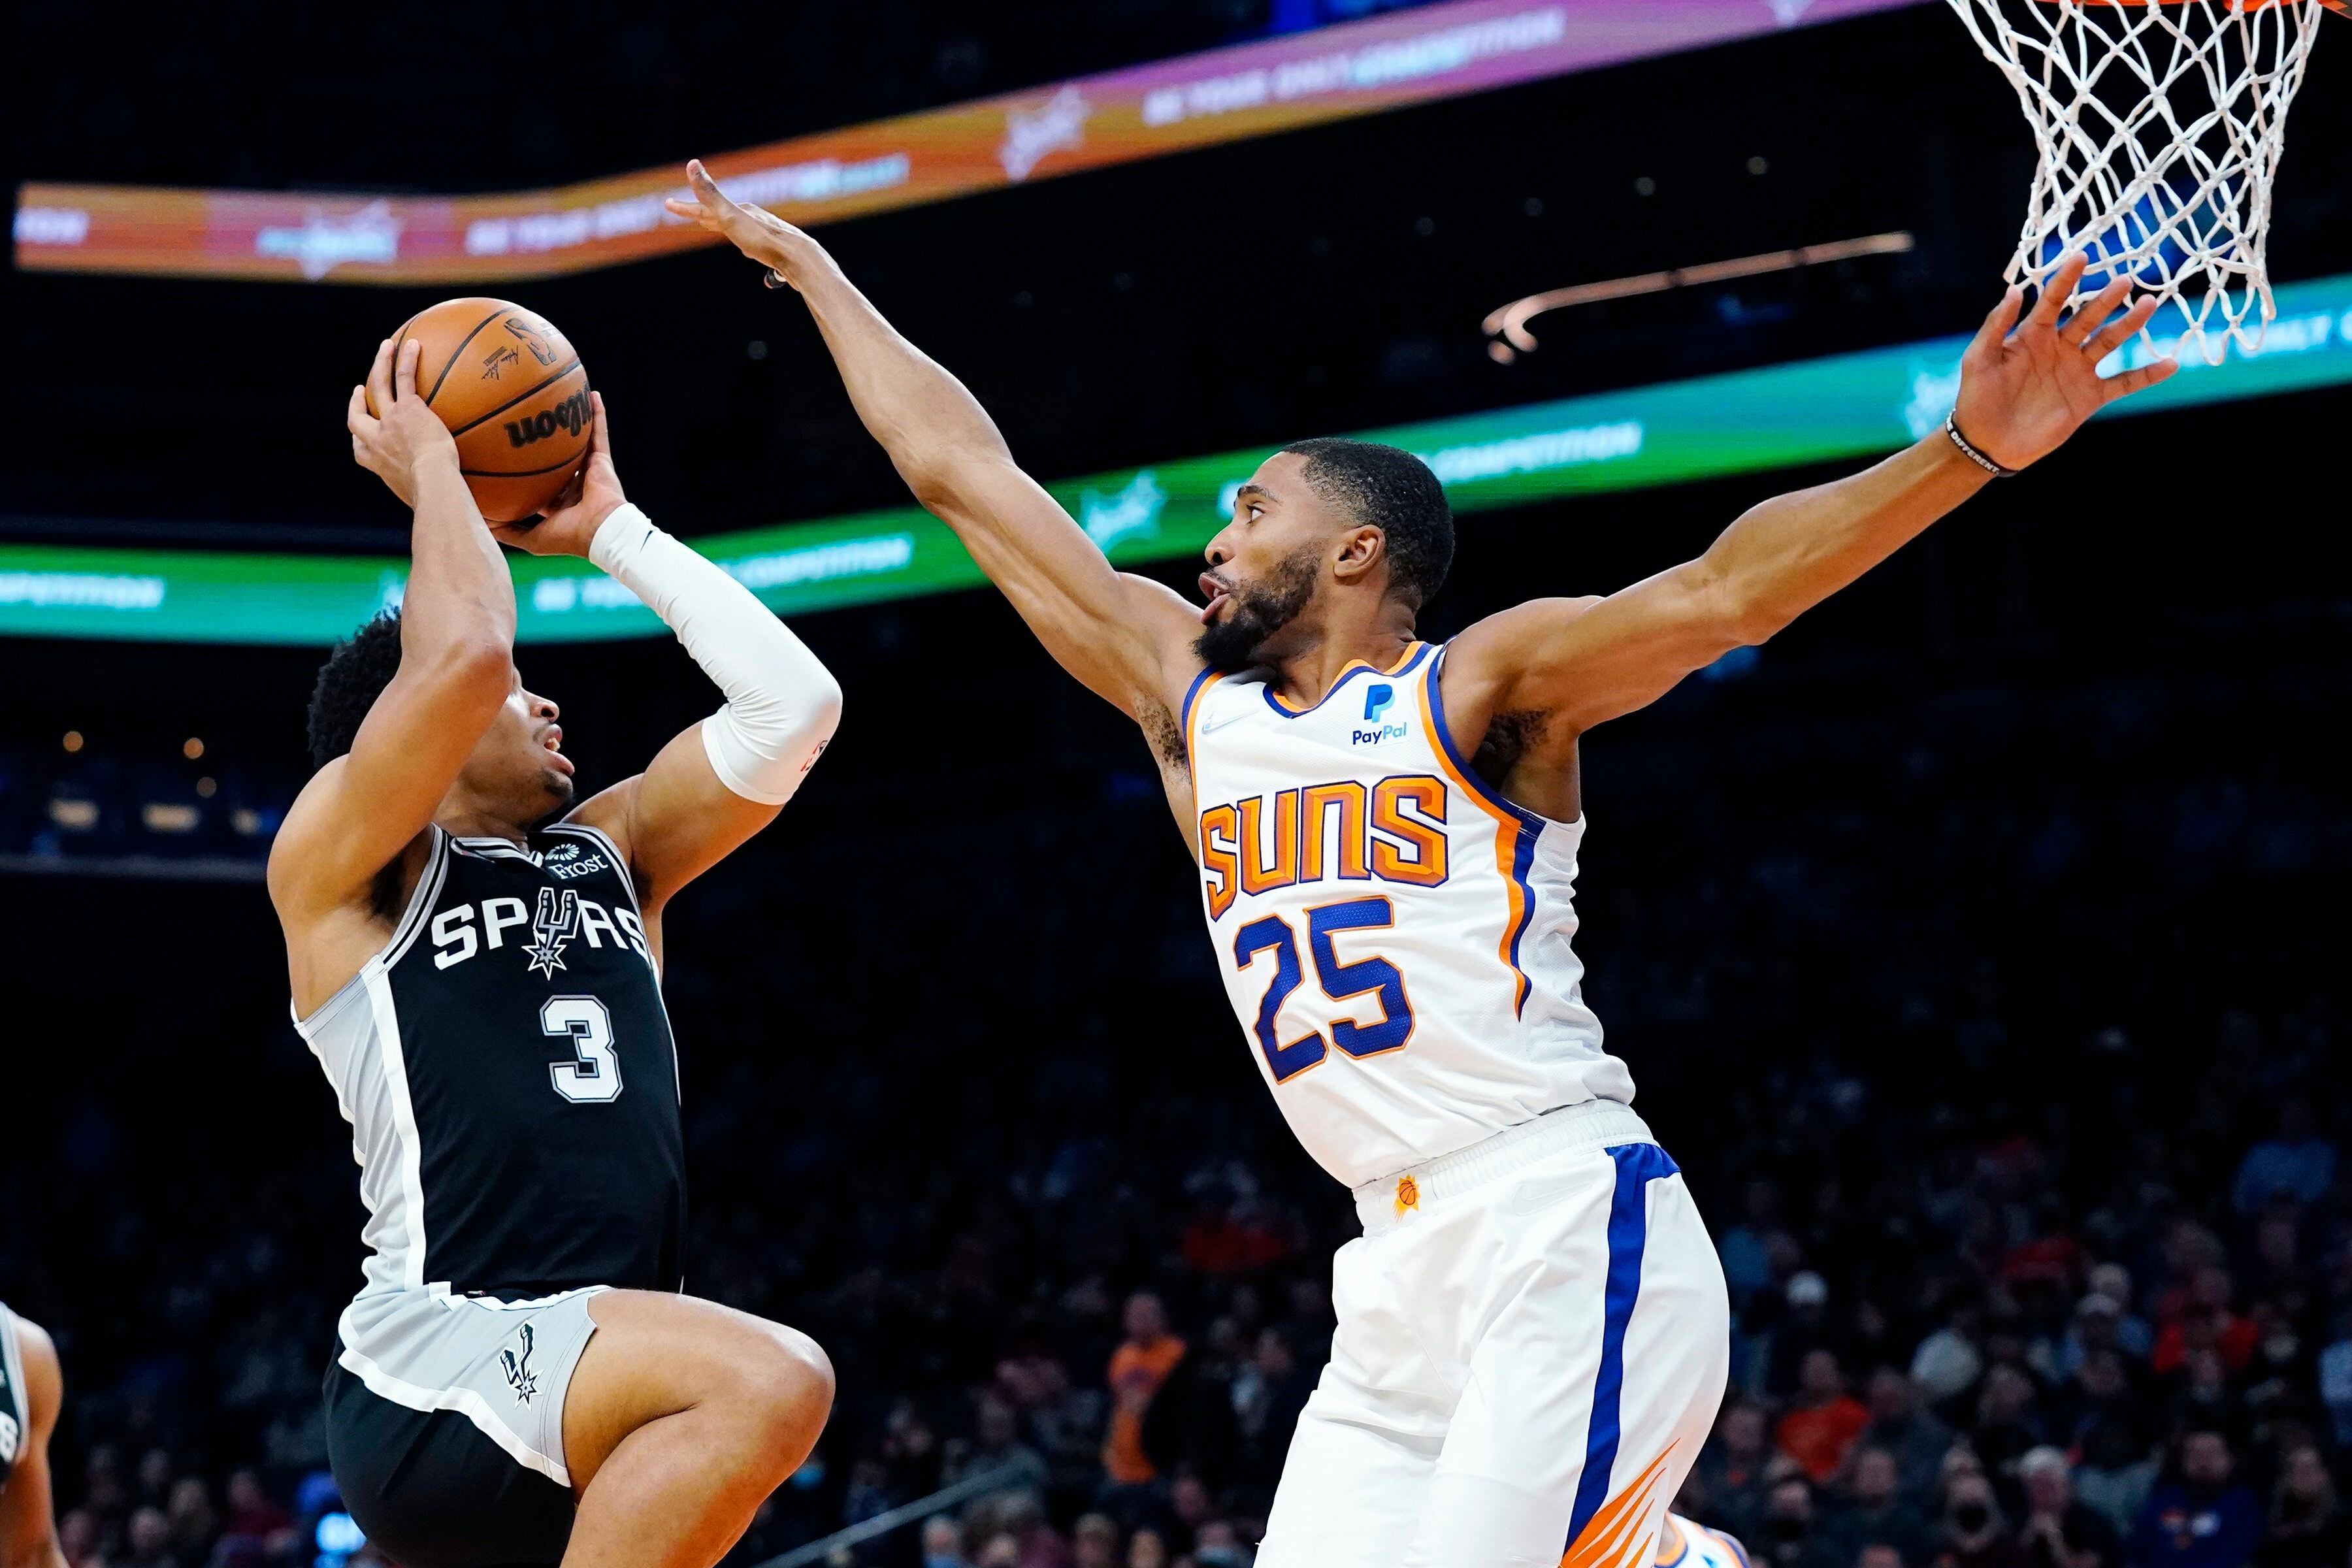 Philly native — and former Sixer — Mikal Bridges is cementing himself as an  NBA ironman for the Phoenix Suns